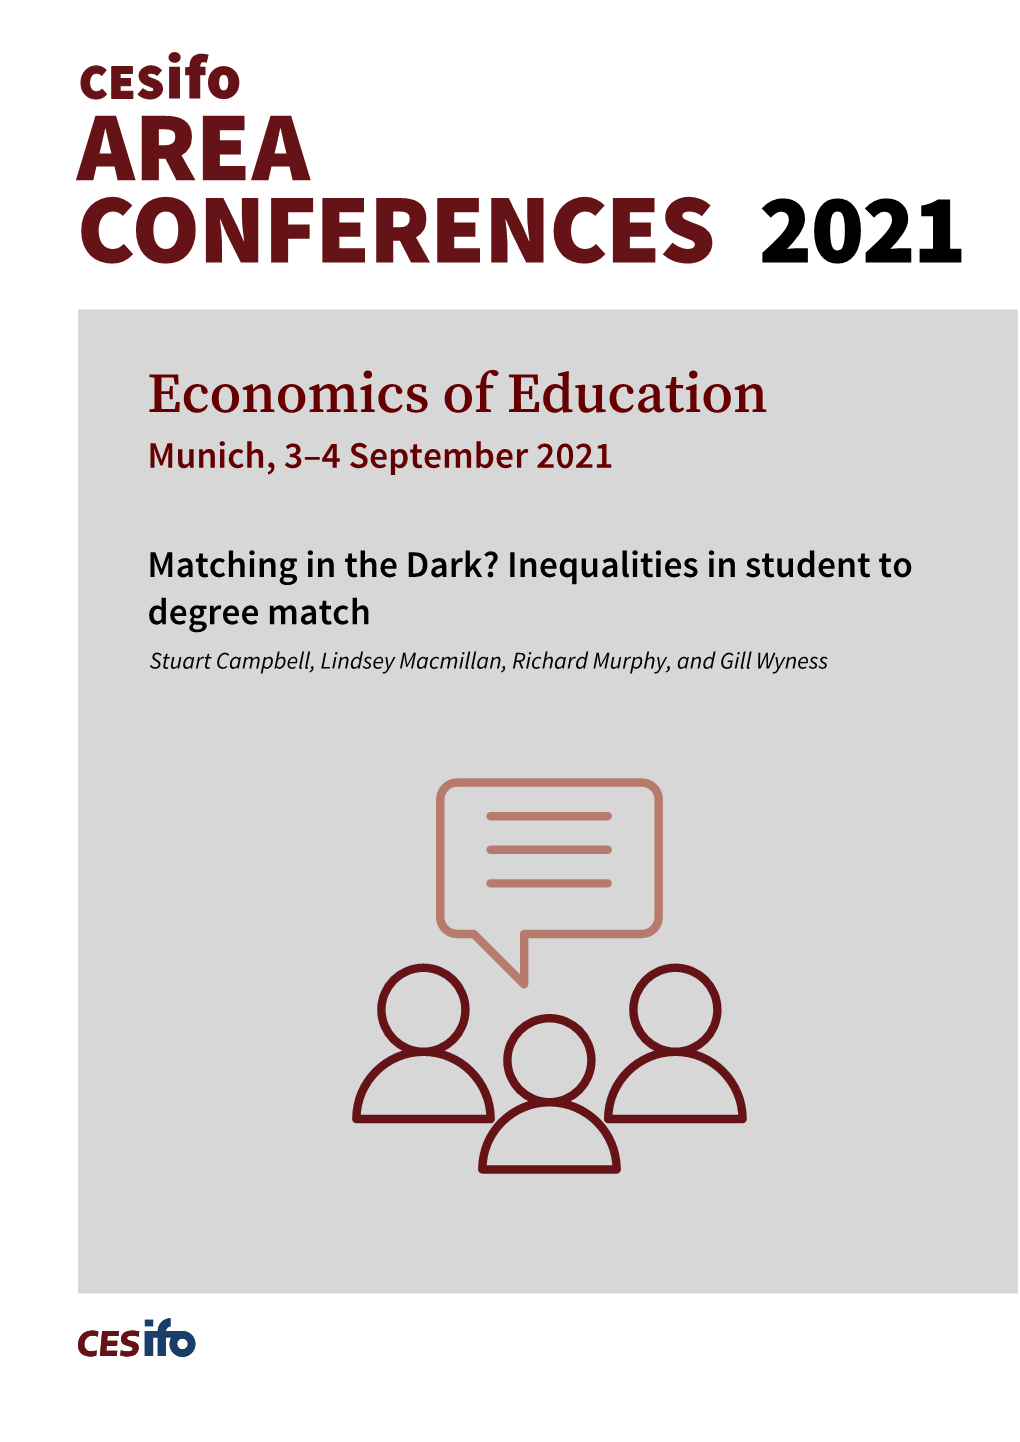 Inequalities in Student to Degree Match Stuart Campbell, Lindsey Macmillan, Richard Murphy, and Gill Wyness